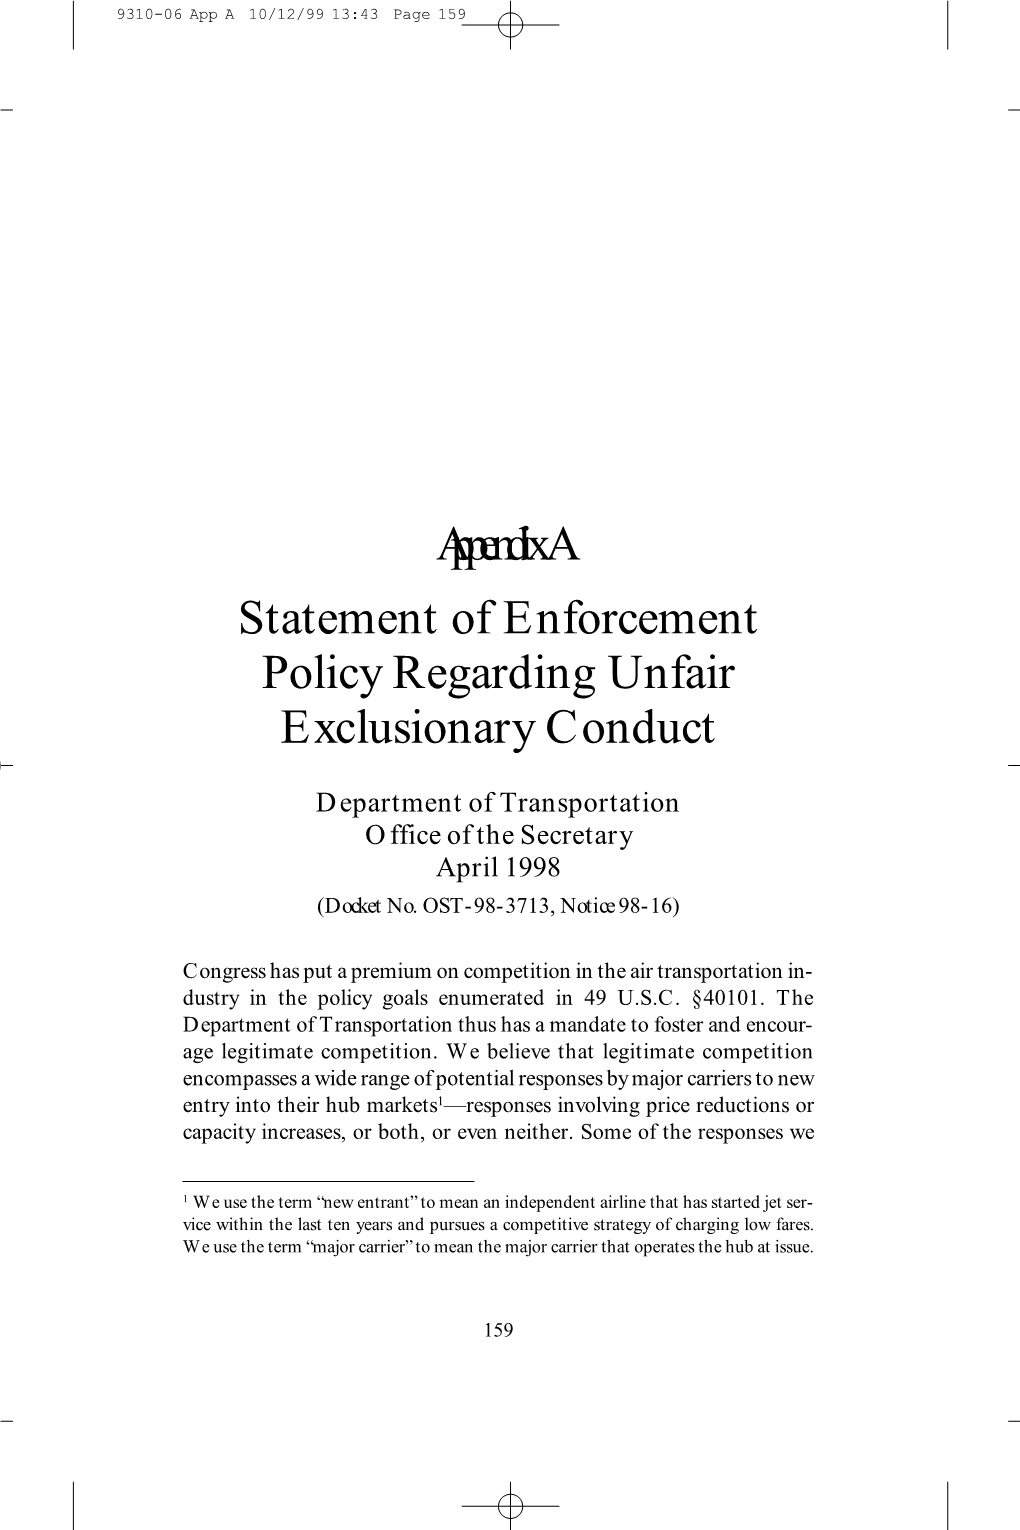 Appendix a Statement of Enforcement Policy Regarding Unfair Exclusionary Conduct